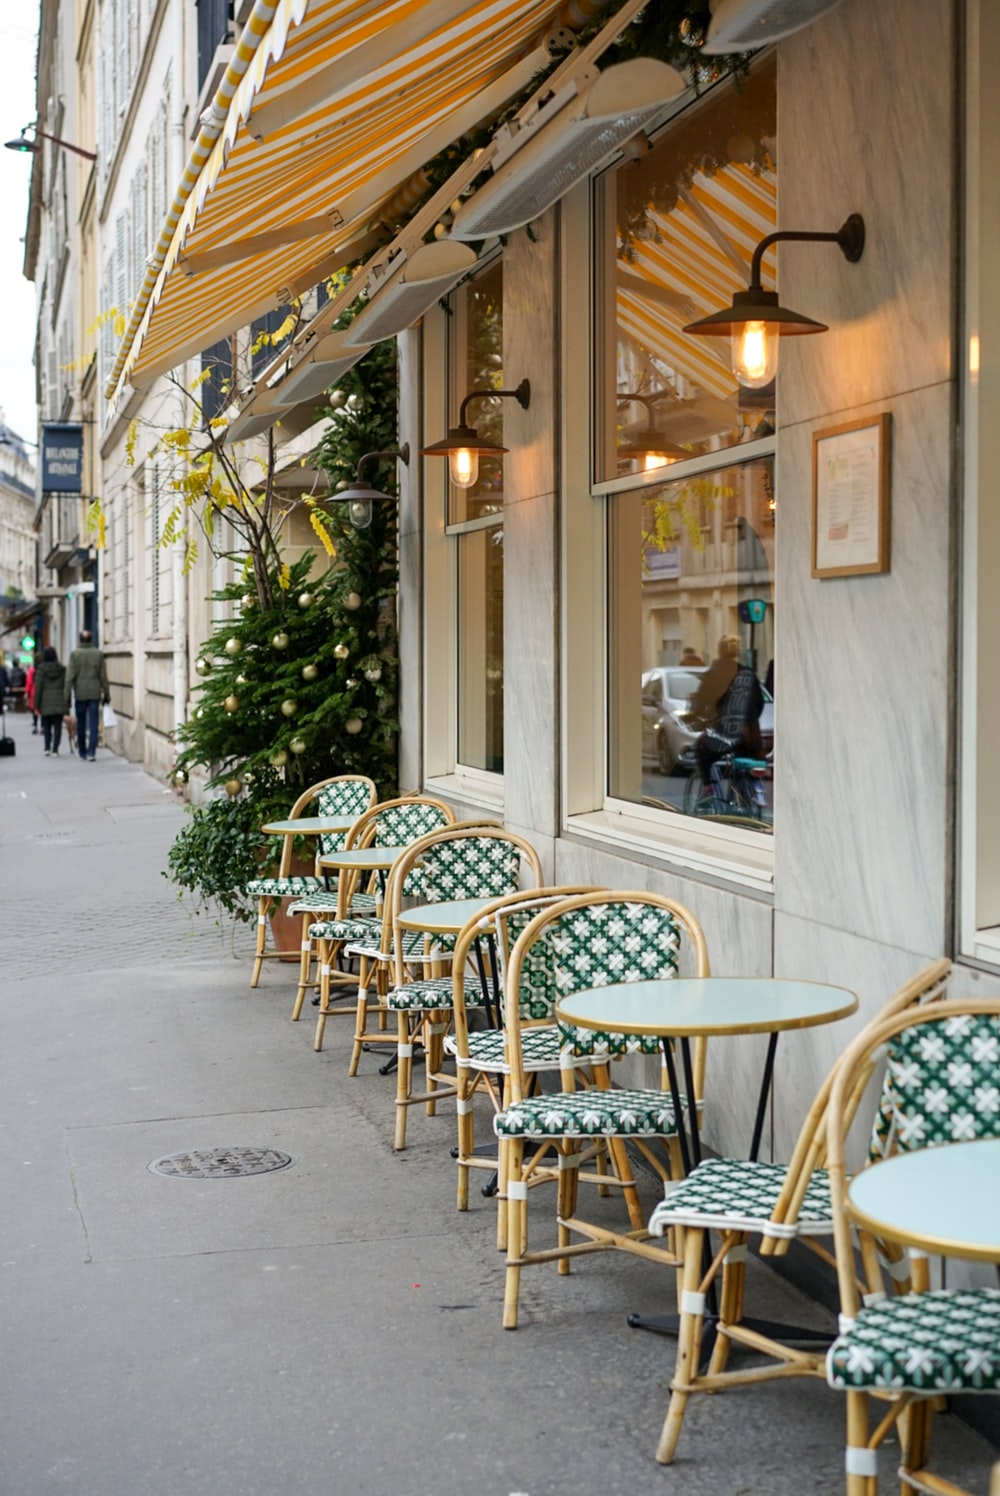 Cafe Outside Picture. Download Free Image